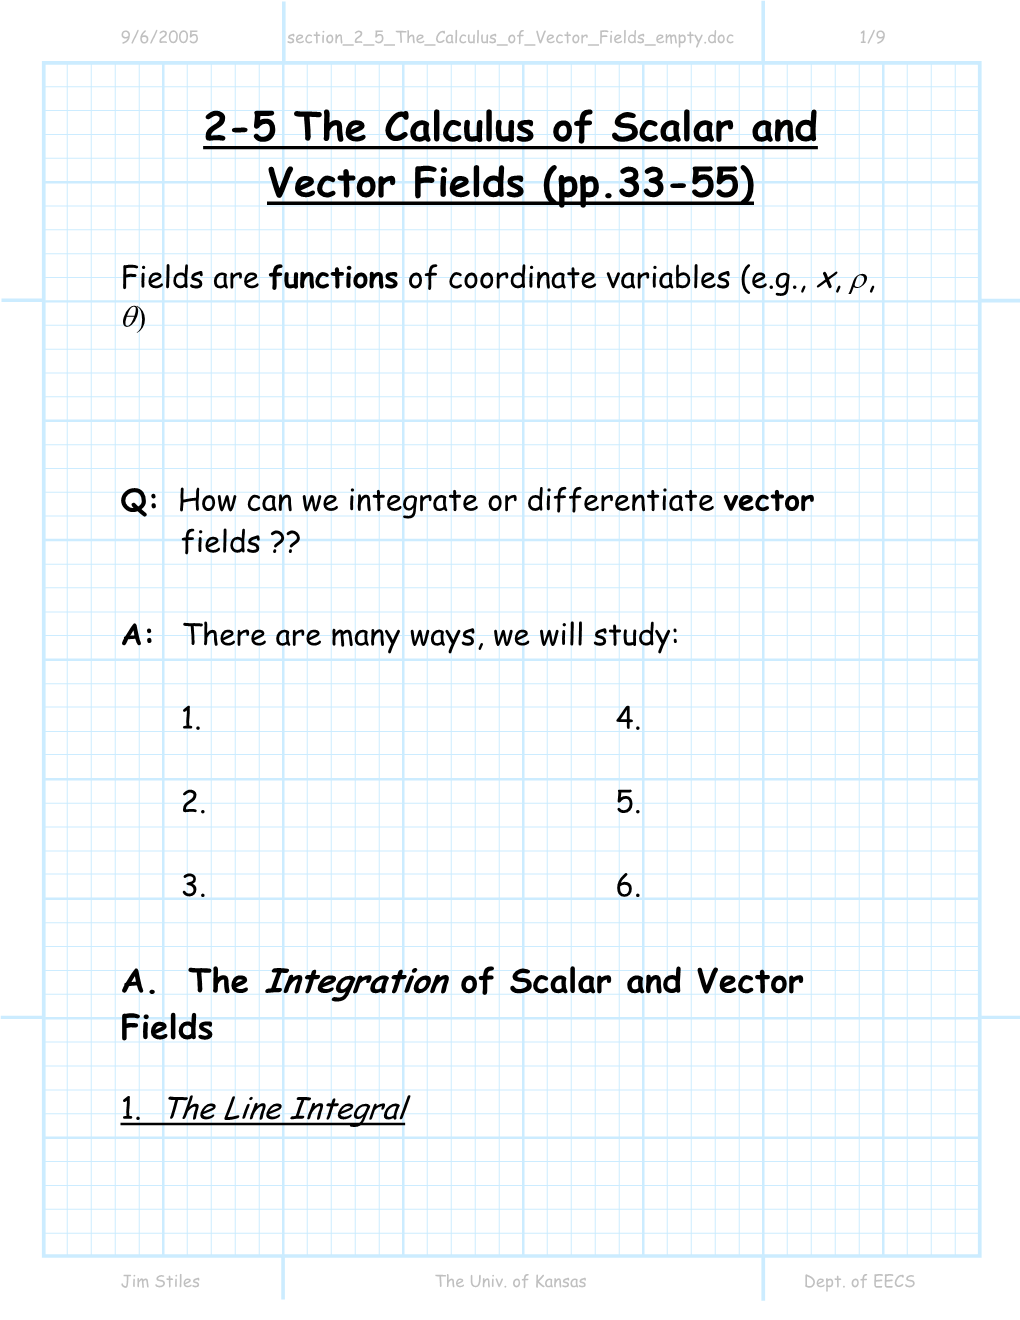 2-5 the Calculus of Scalar and Vector Fields (Pp.33-55)